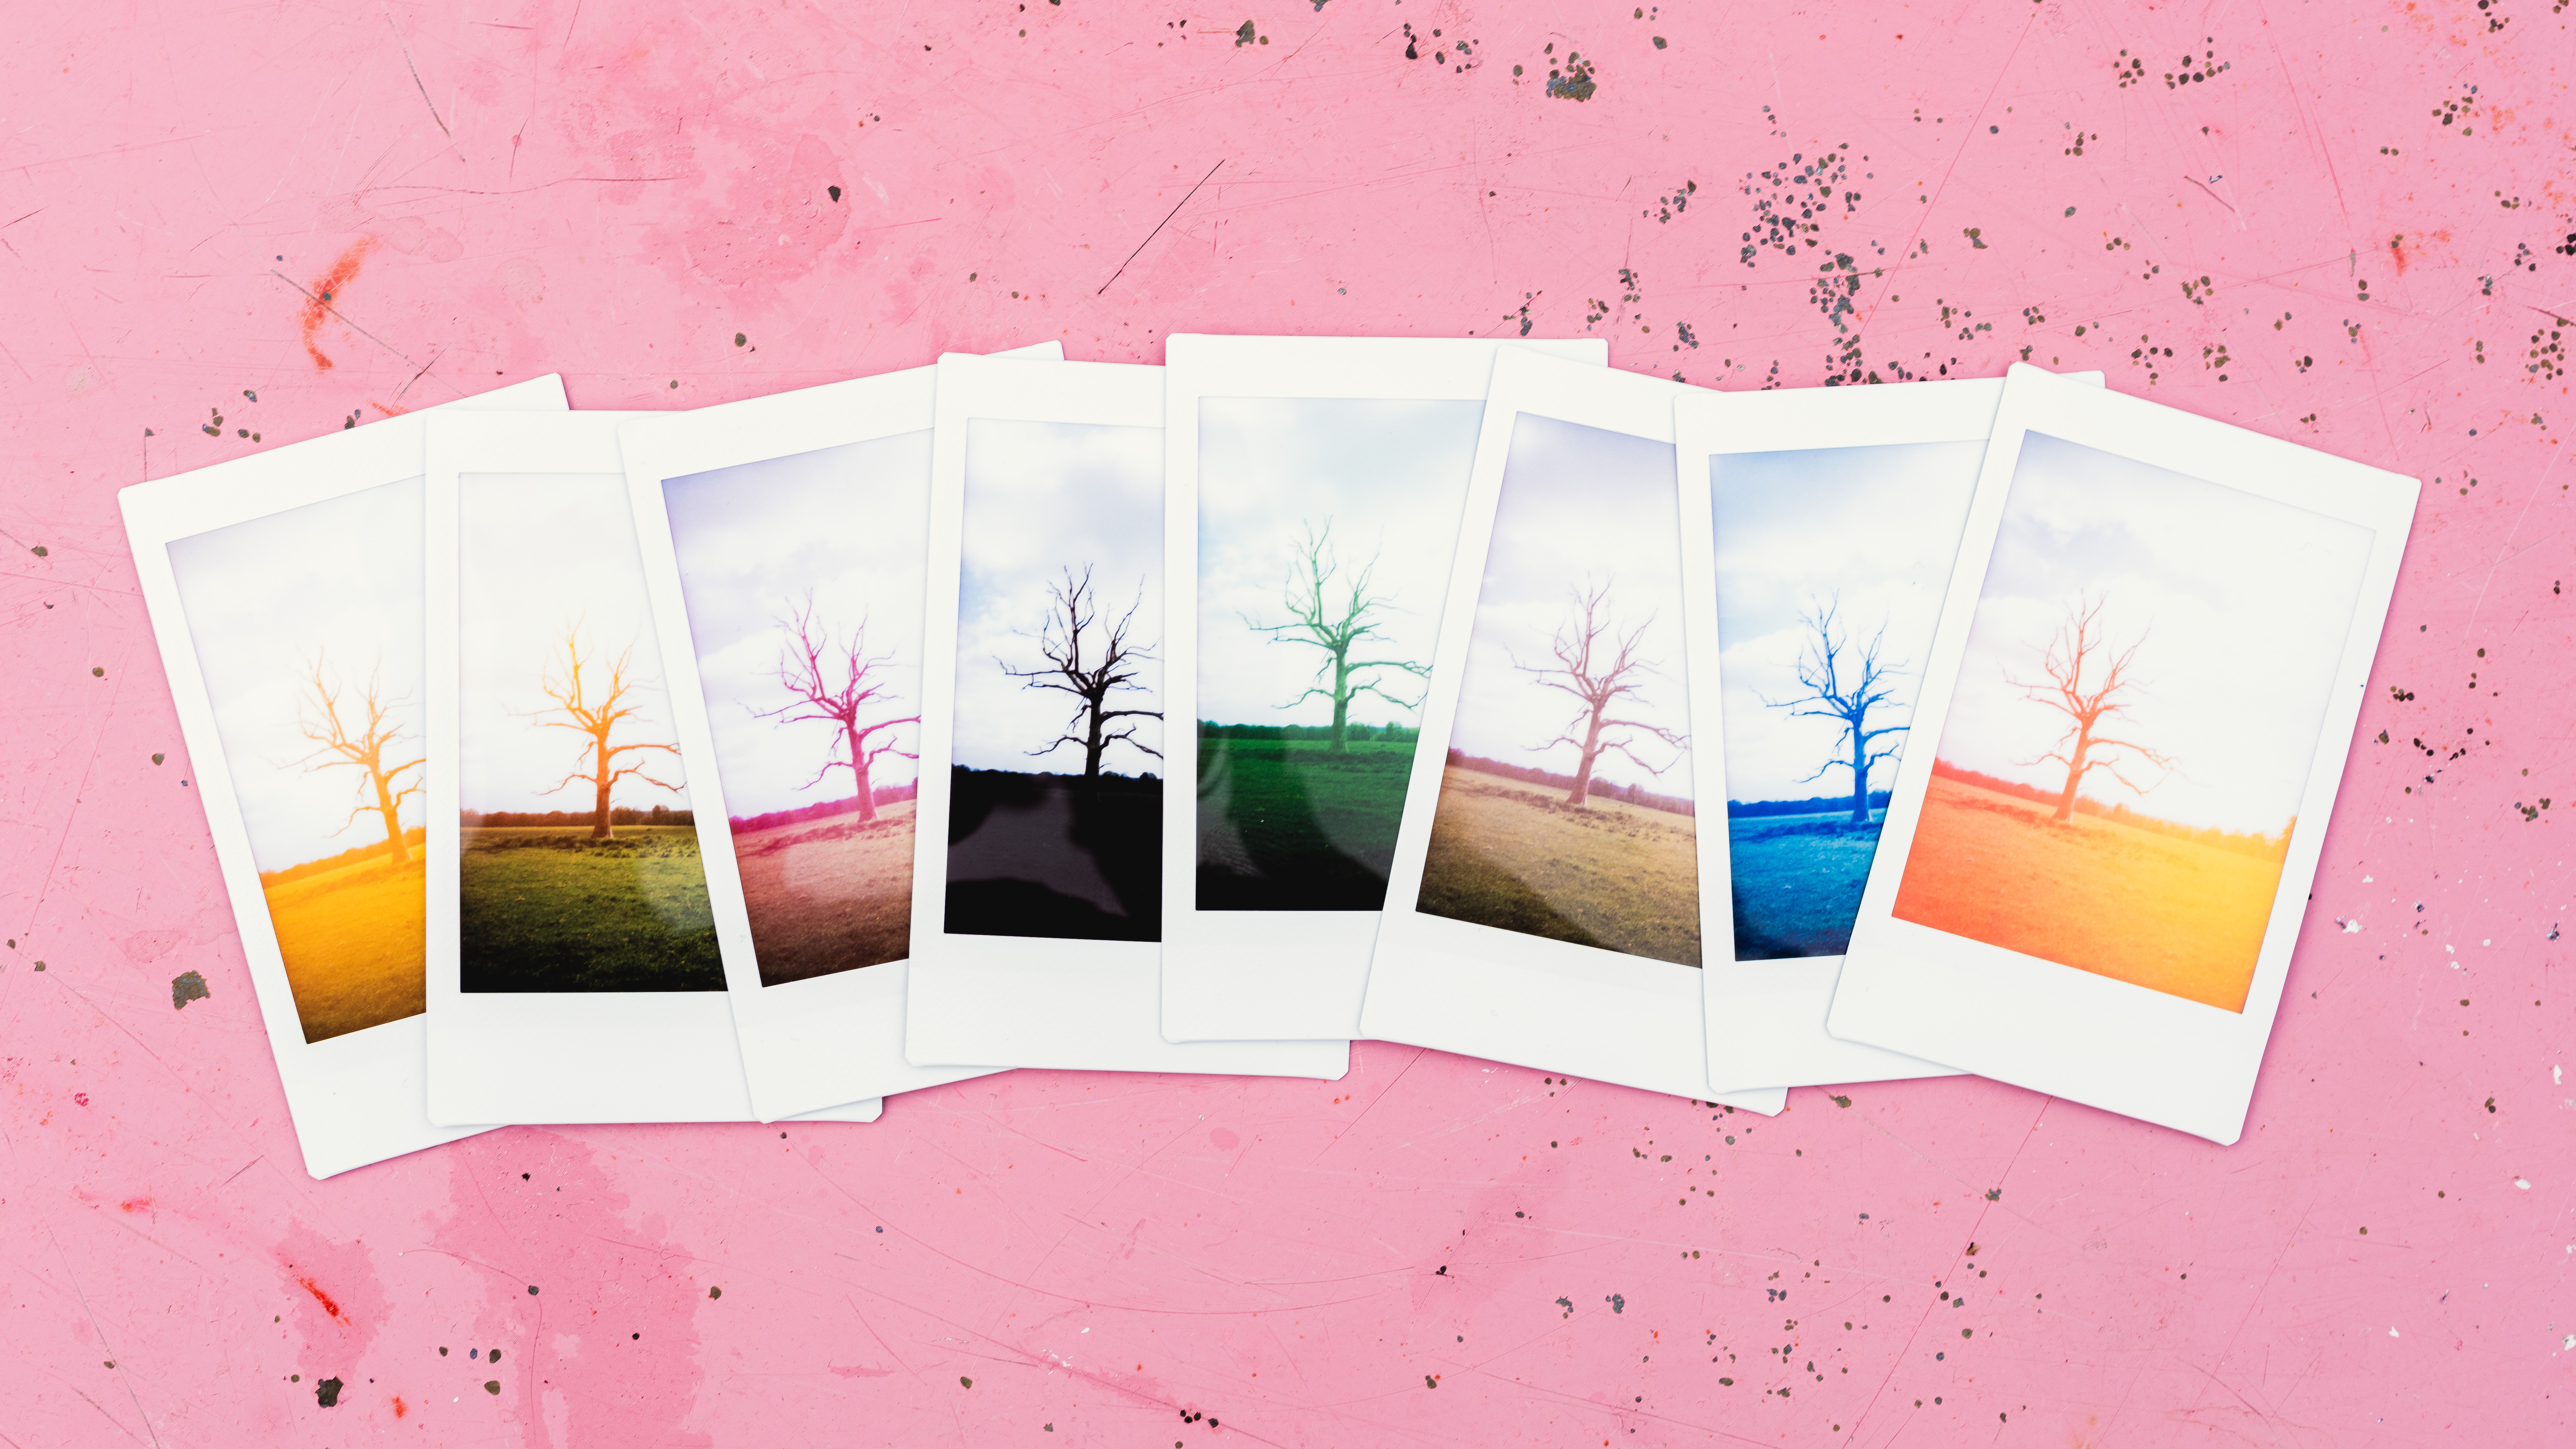 A range of the same Fujifilm Instax Mini 99 instant print of a tree silhouette on crest of a hill with variety of creative color effects applied